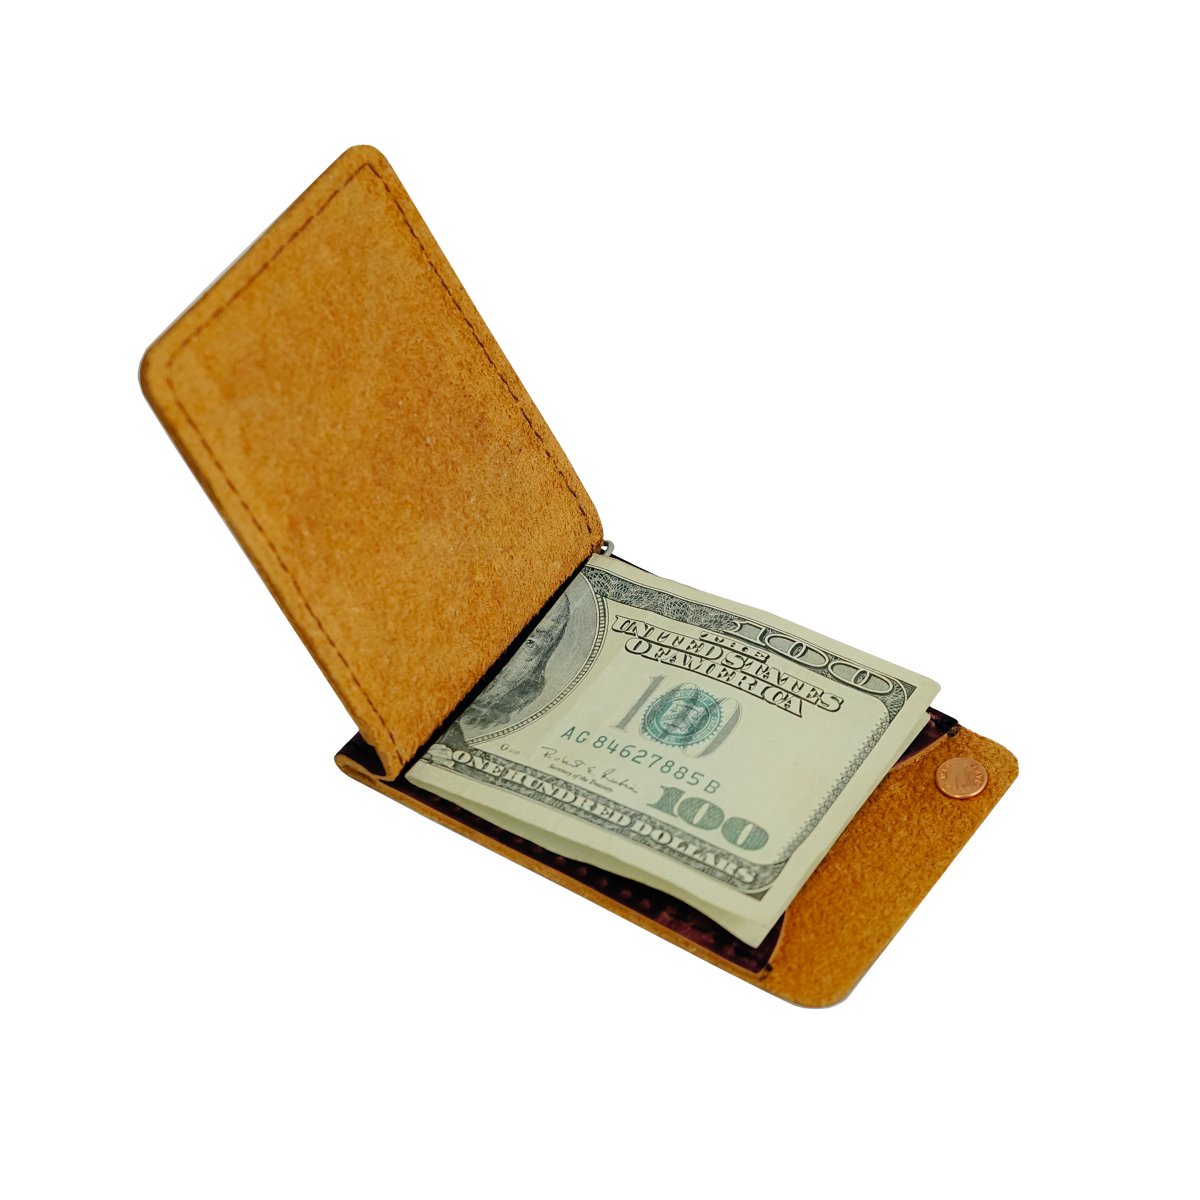 THE RAW CRAFTERS - Money Clip Wallet